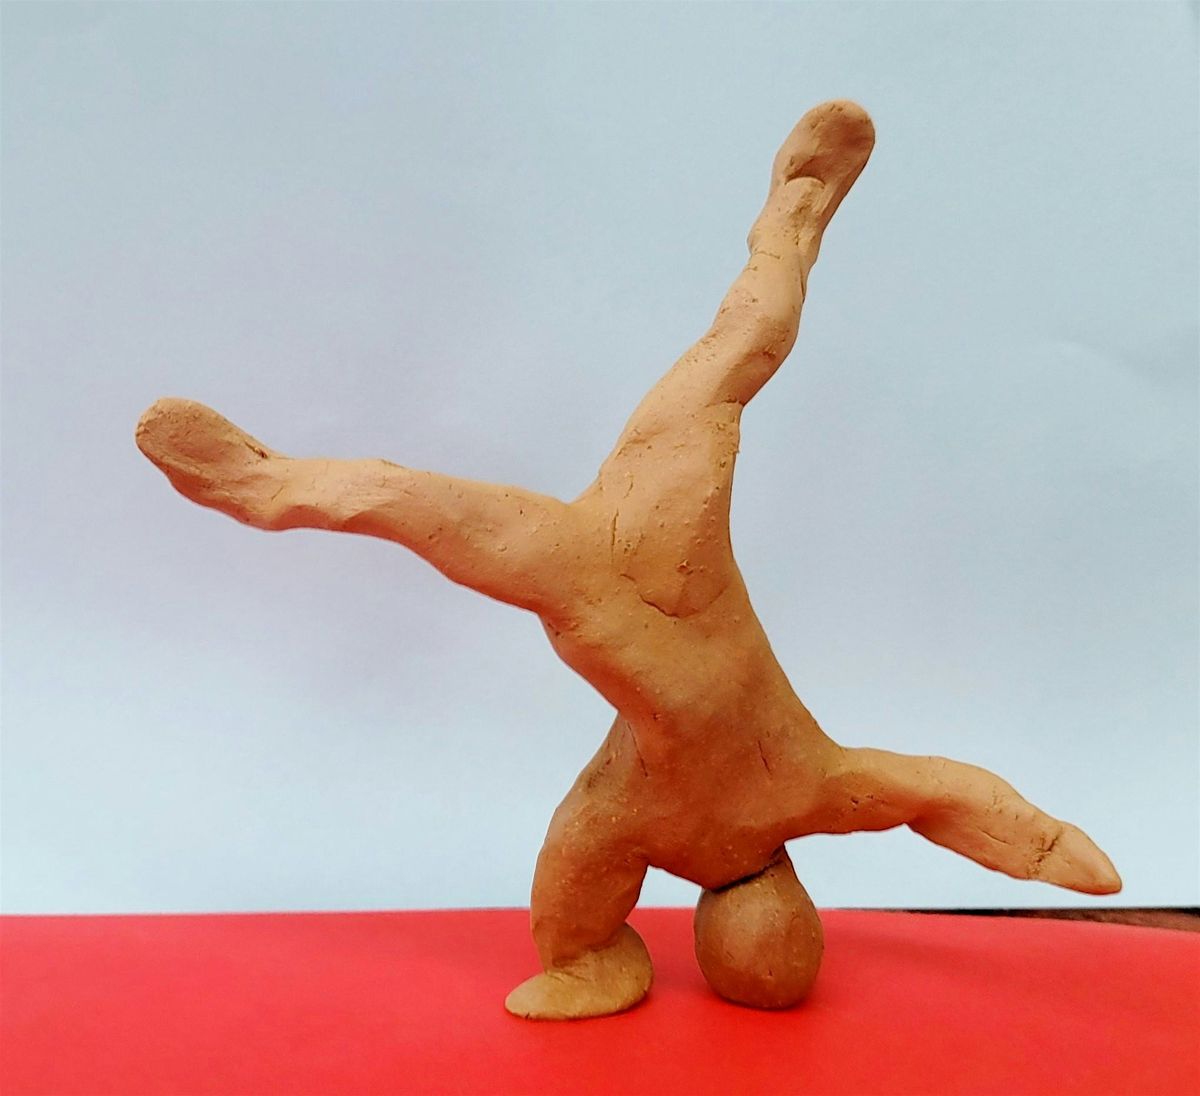 Clay gymnasts (Mudgee Library ages 9-12)